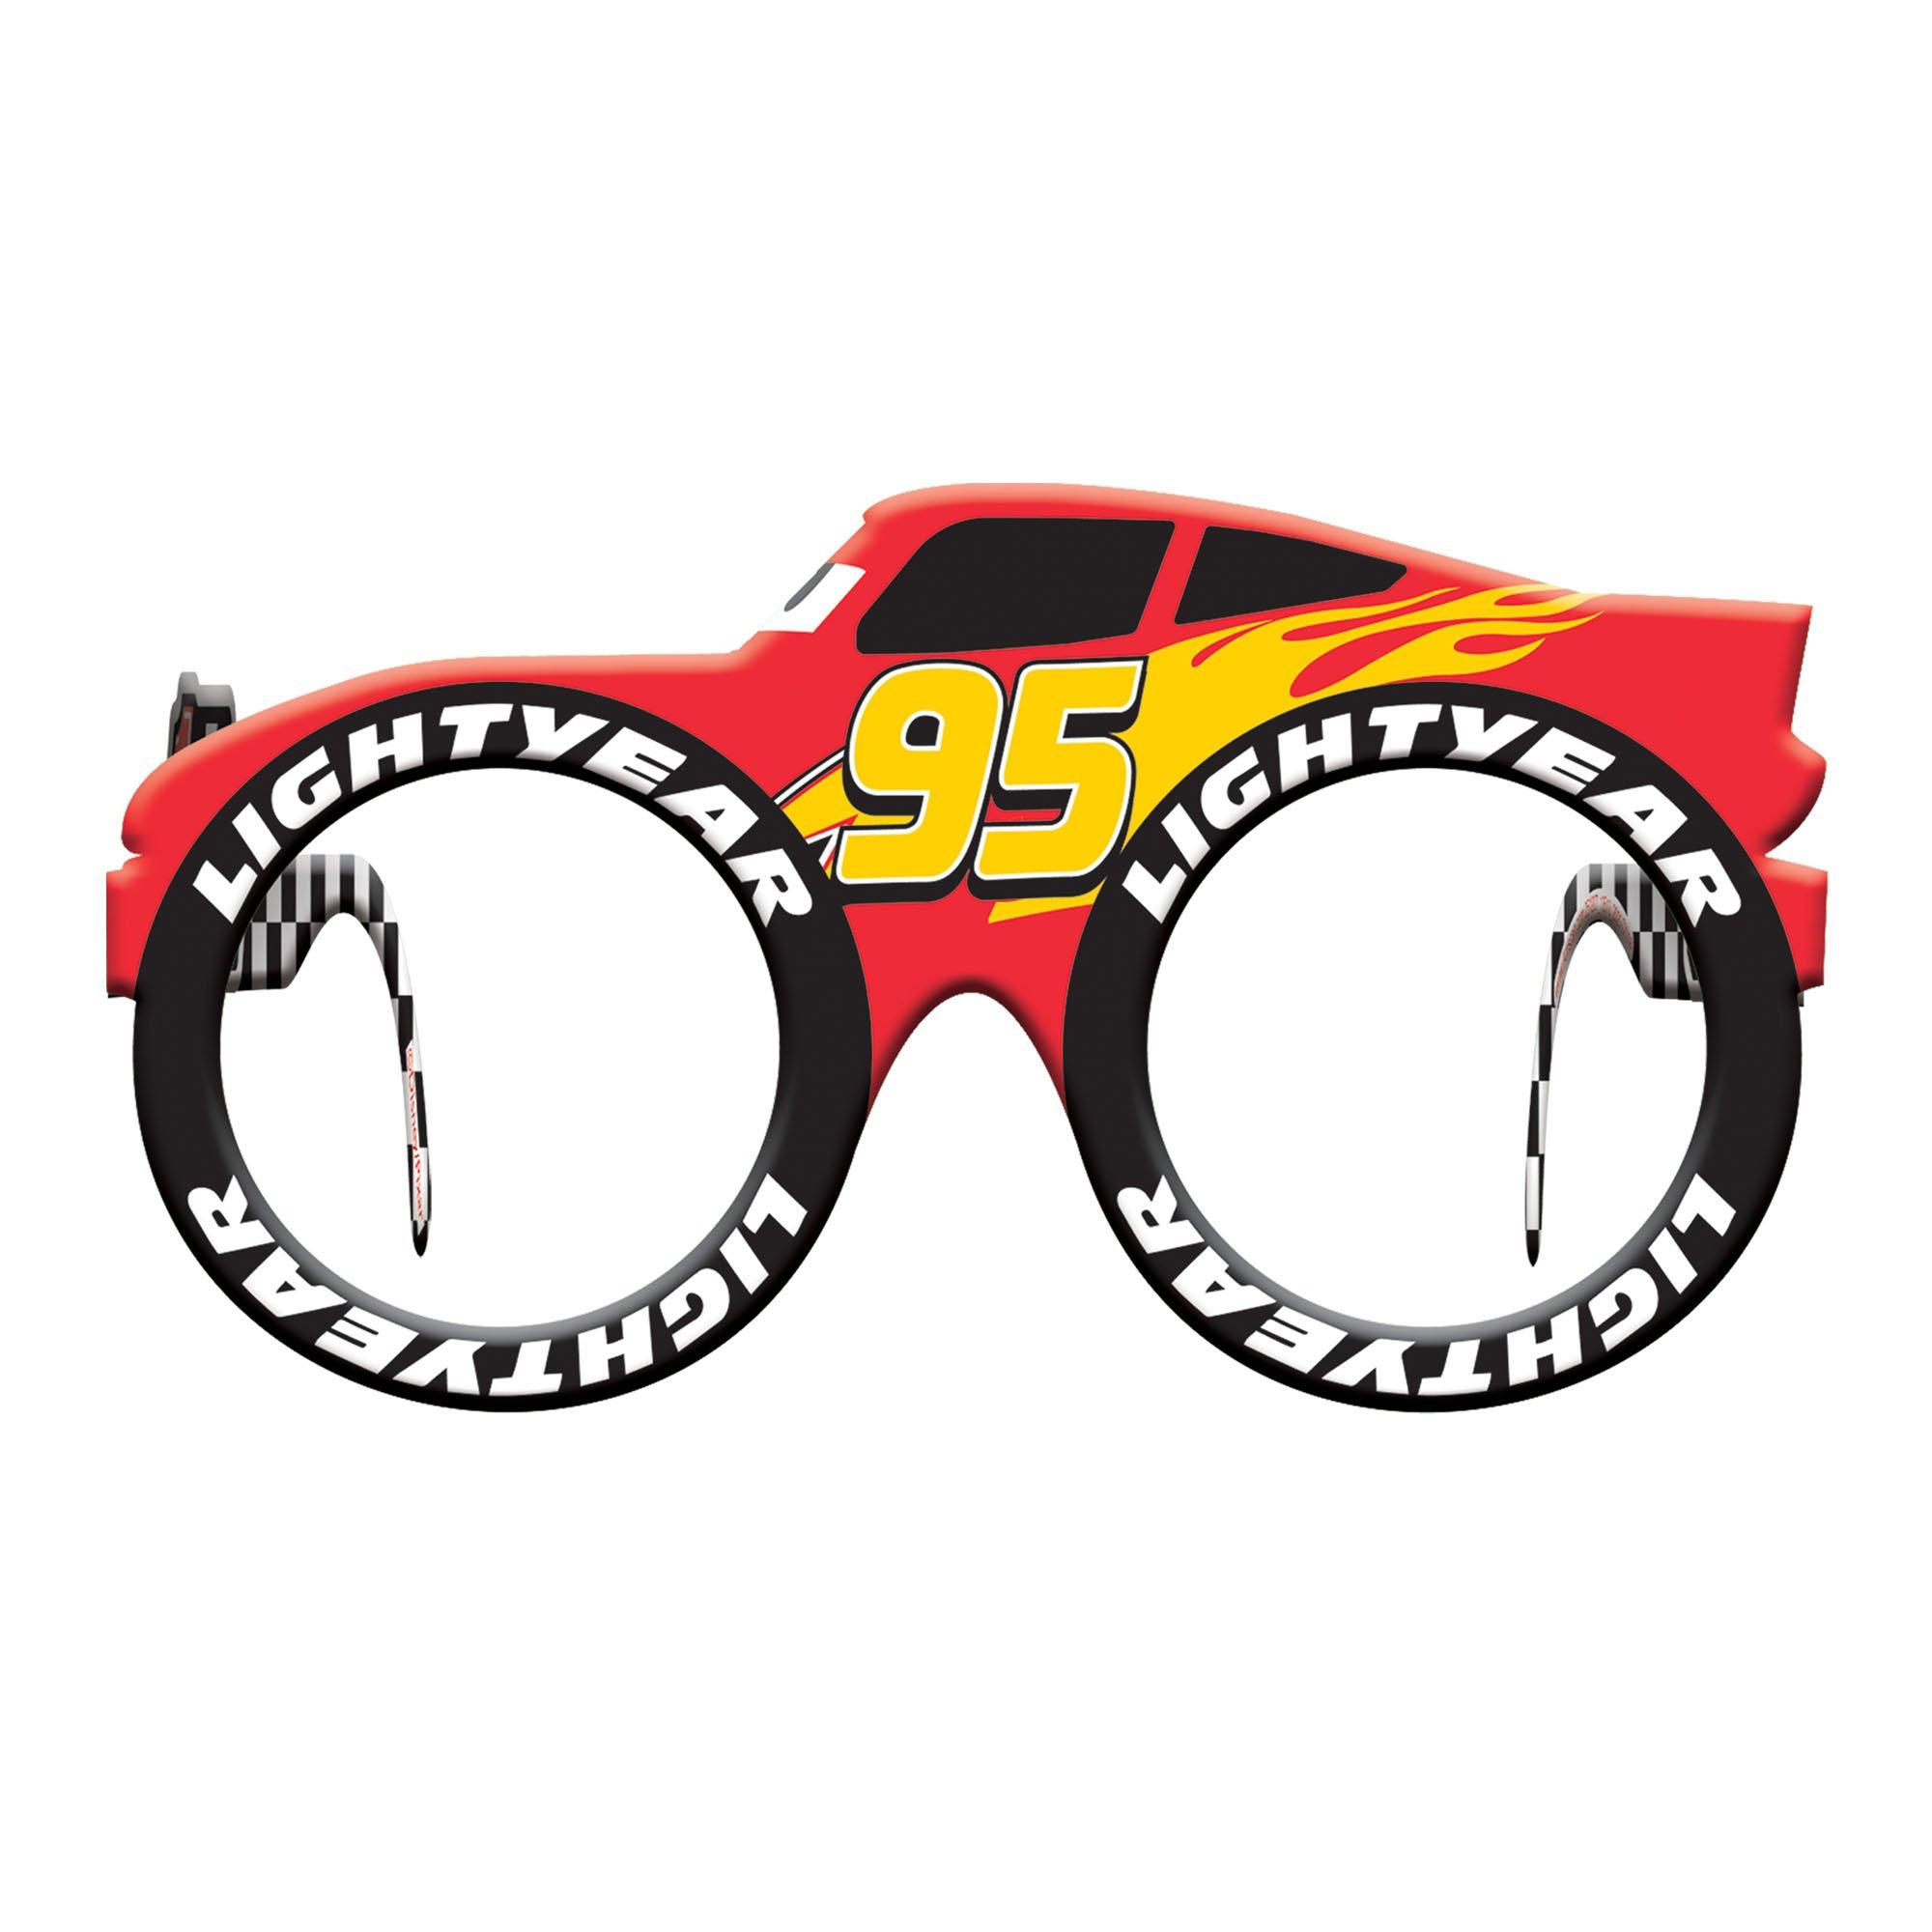 Lightning McQueen Racecar Glasses - Cars 3 | Party City